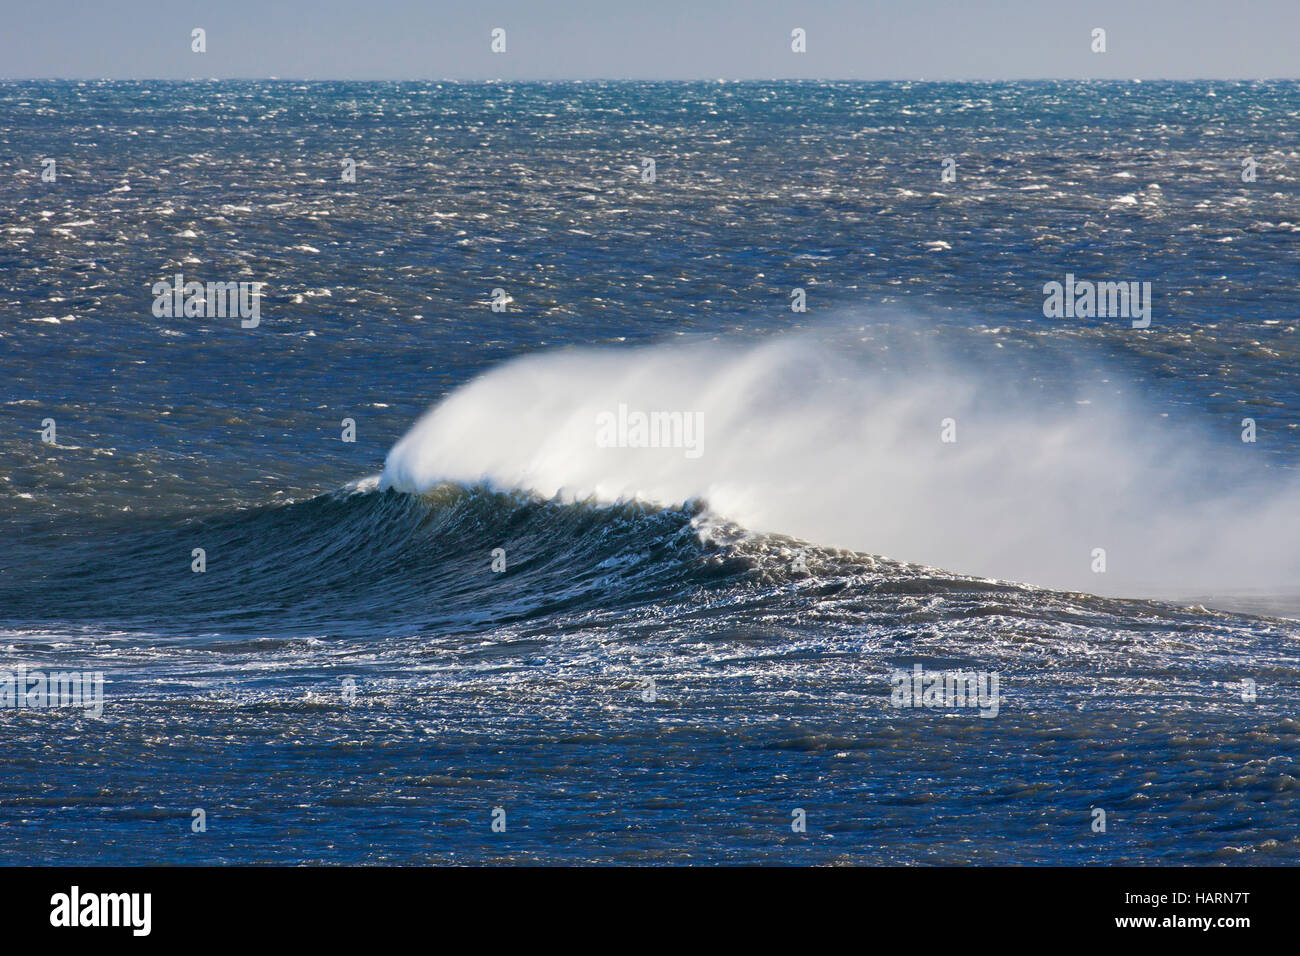 Wave crest at Arctic sea showing airborne spray and spindrift due to high winds Stock Photo